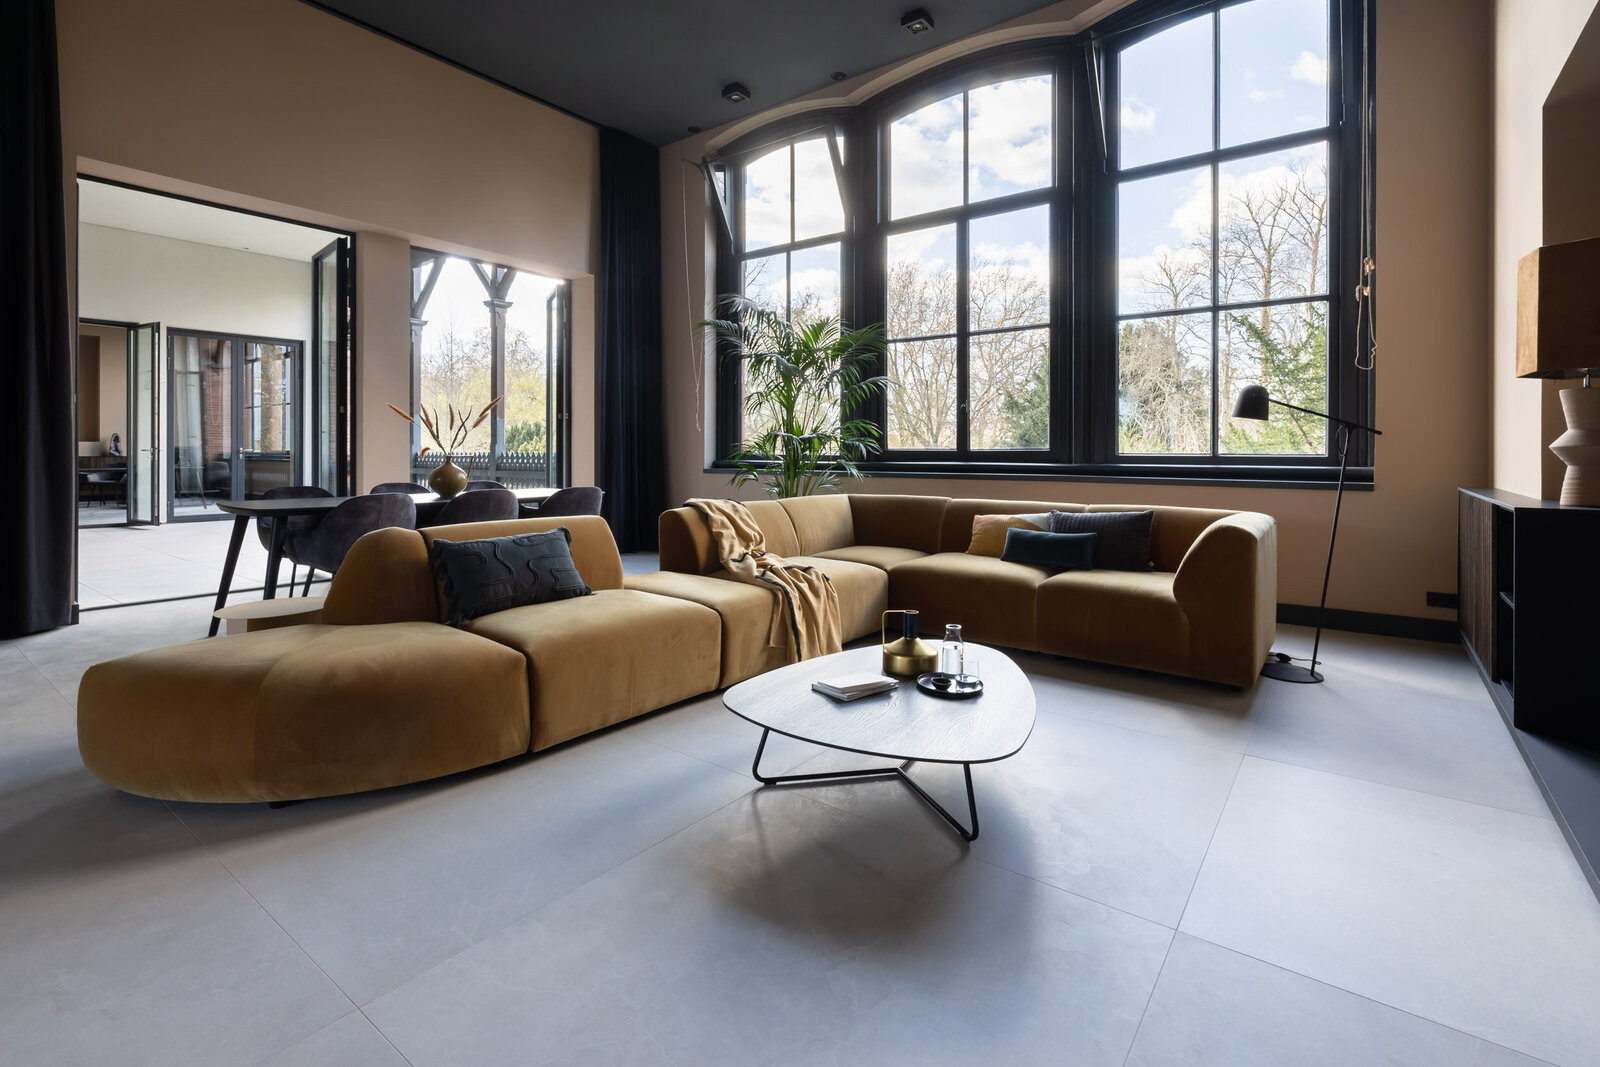 Stylish spacious living room with view on the Noorderplantsoen park in Groningen. High ceilings give the warm colored room lots of light and space.